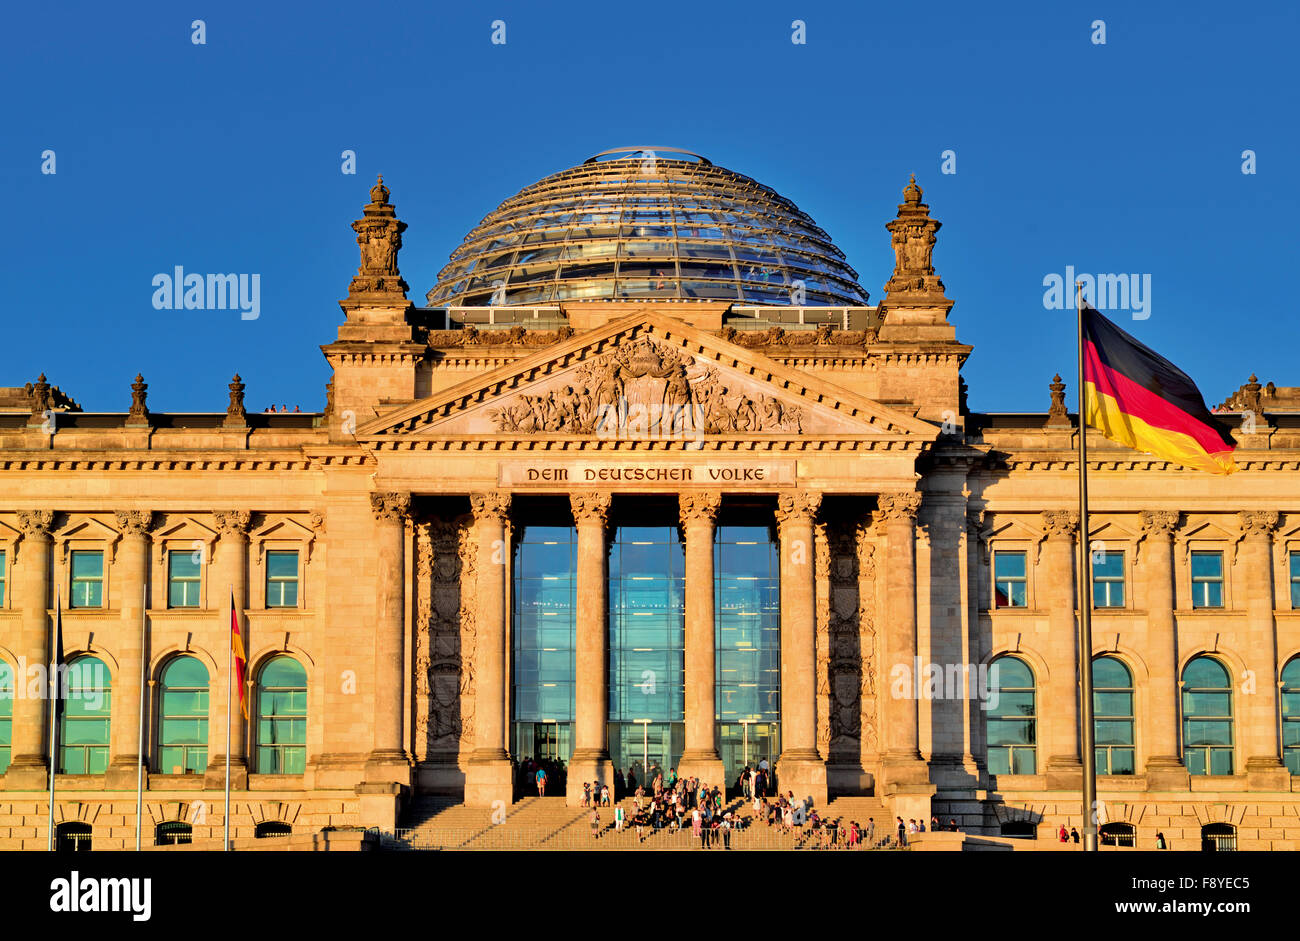 Germany, Berlin: Main facade of the German House of Parliament 'Reichstag' Stock Photo